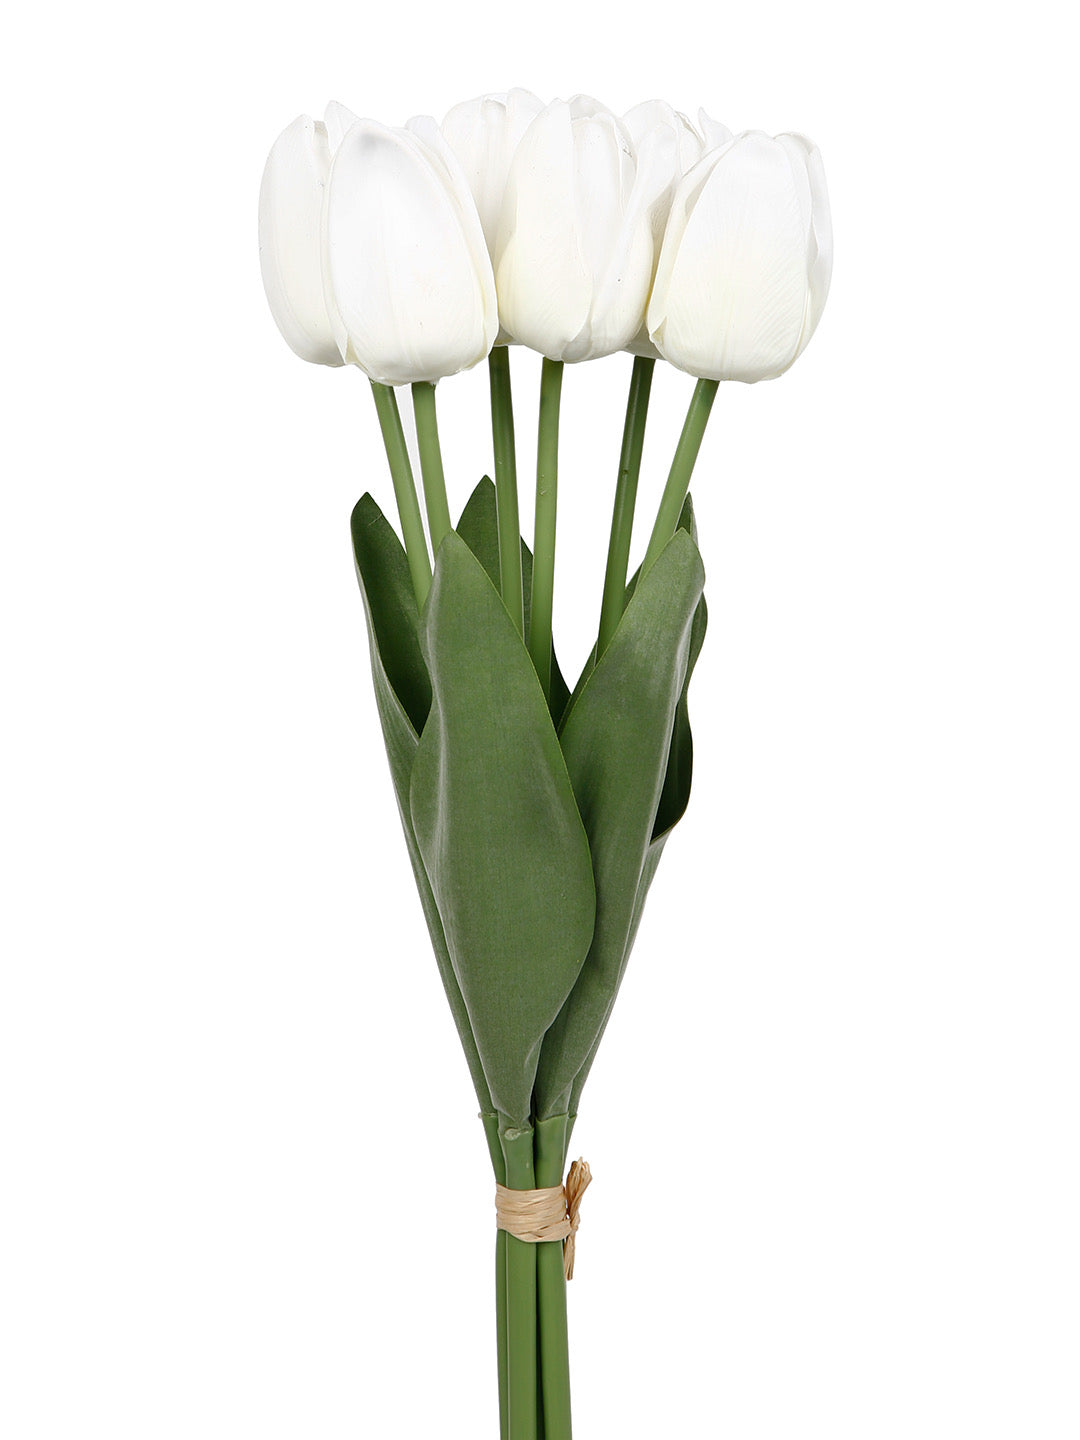 Set of 6 Realistic Charm Shaded White Tulip Flower stick - Default Title (FL21203WH)